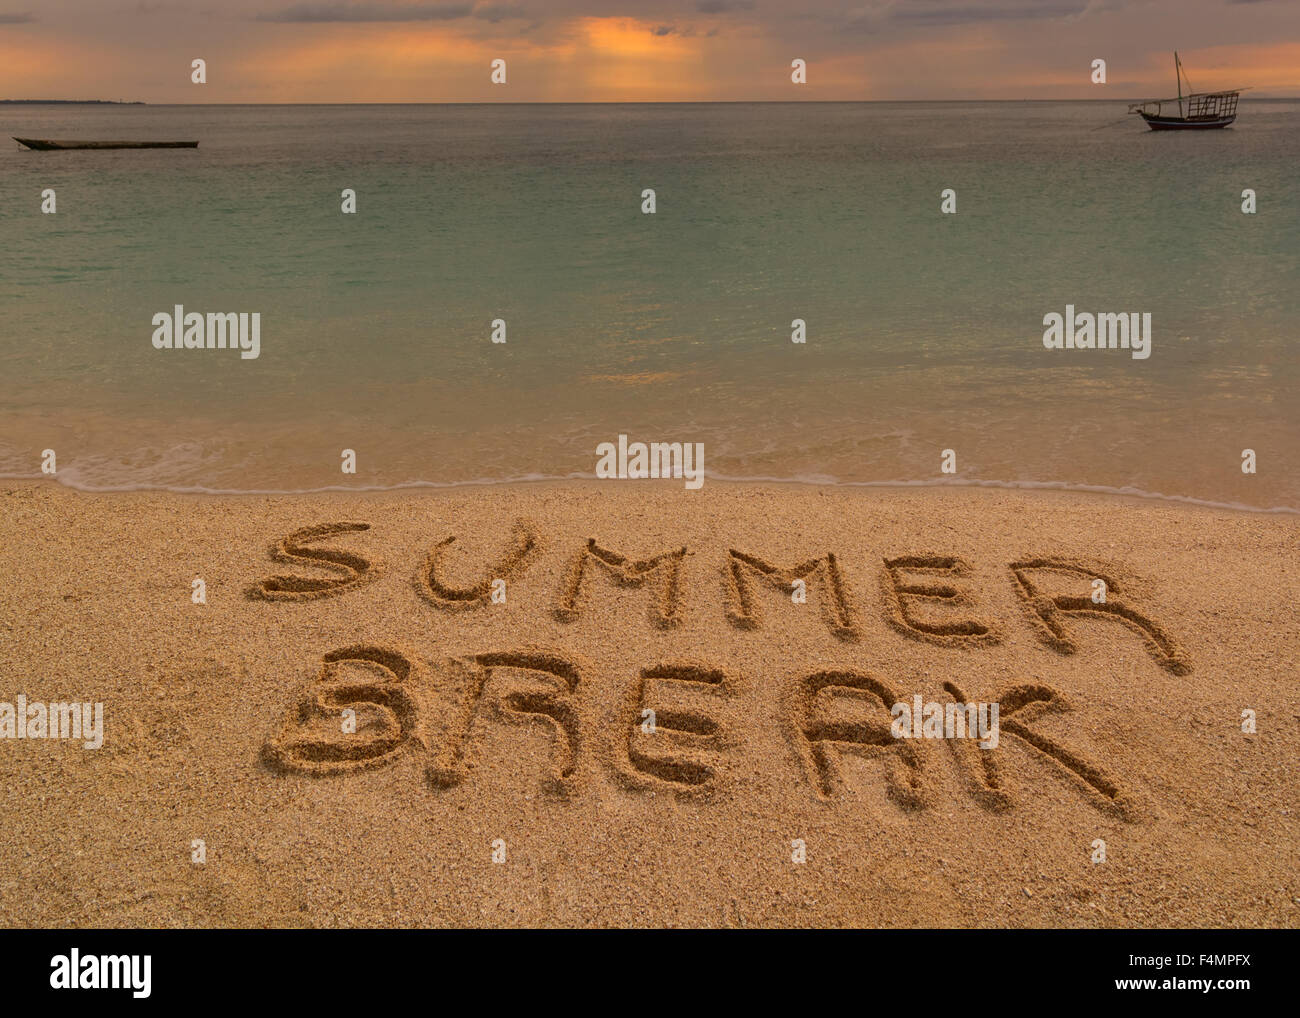 In the picture a beach at sunset with the words on the sand 'Summer break'. Stock Photo